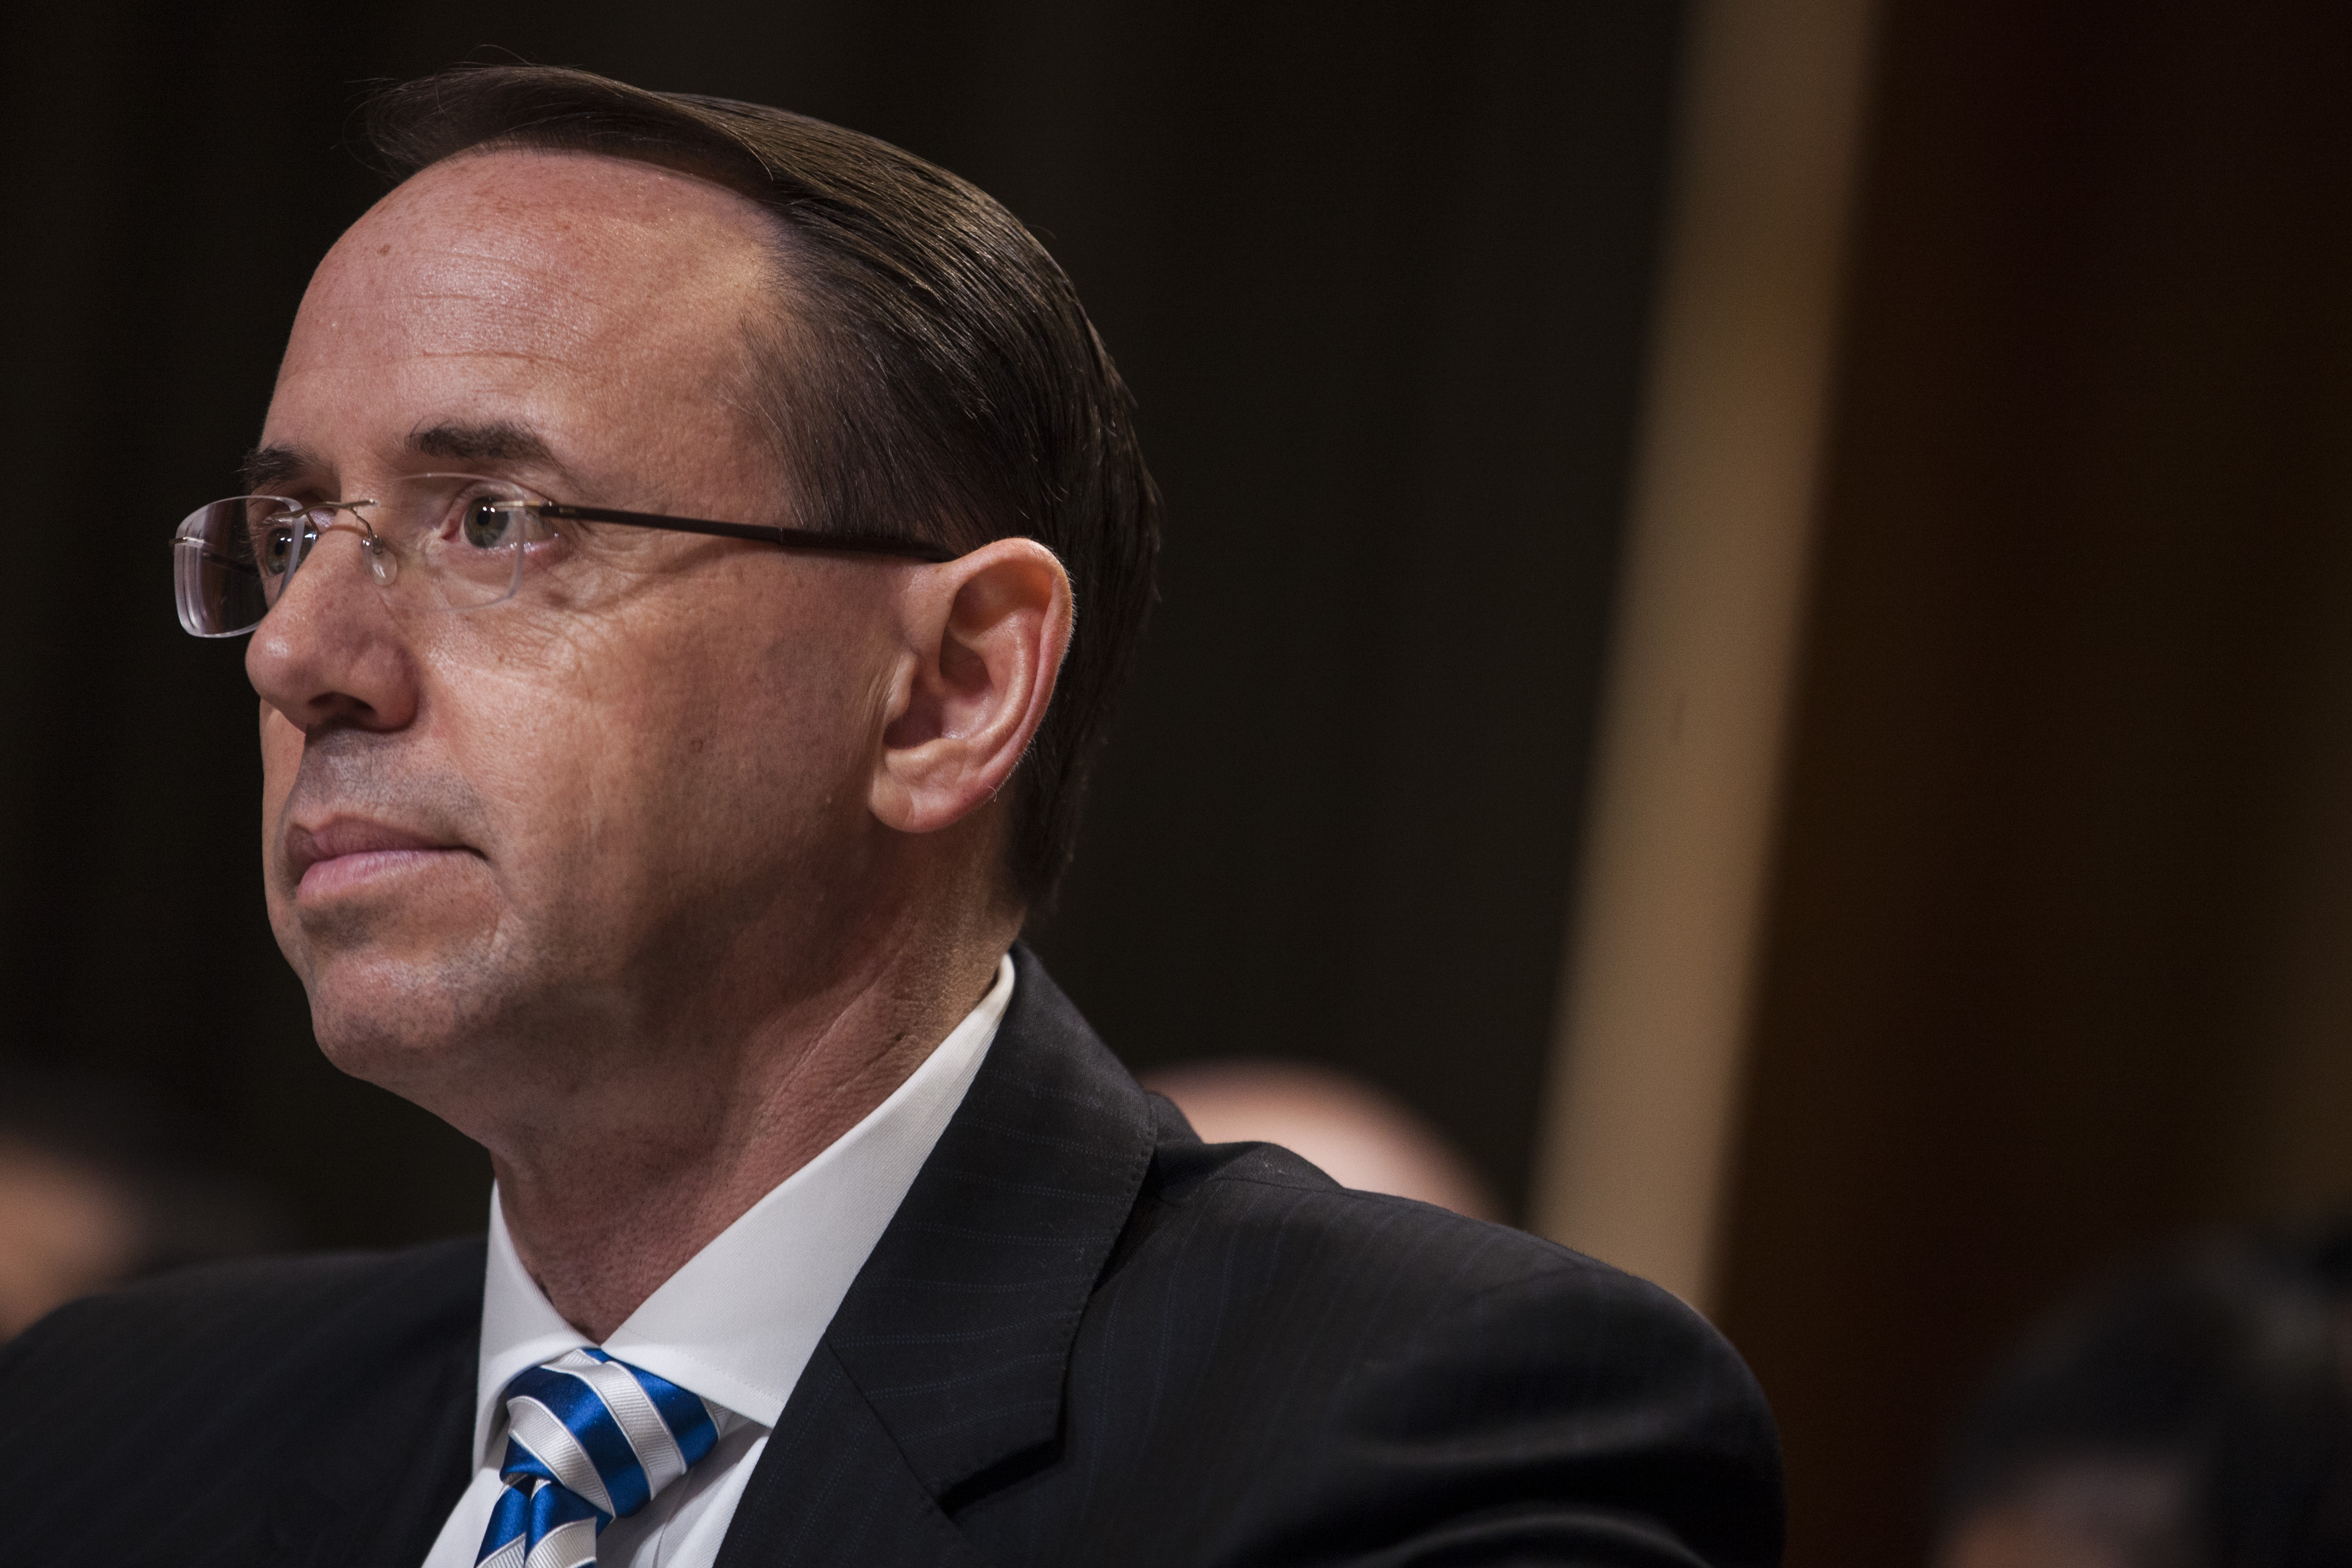 Deputy Attorney General Rod Rosenstein testifies during a Senate Commerce, Justice, Science, and Related Agencies Subcommittee hearing on the Justice Department's proposed FY18 budget on Capitol Hill on June 13, 2017 in Washington, D.C. Zach Gibson—Getty Images (Zach Gibson—Getty Images)